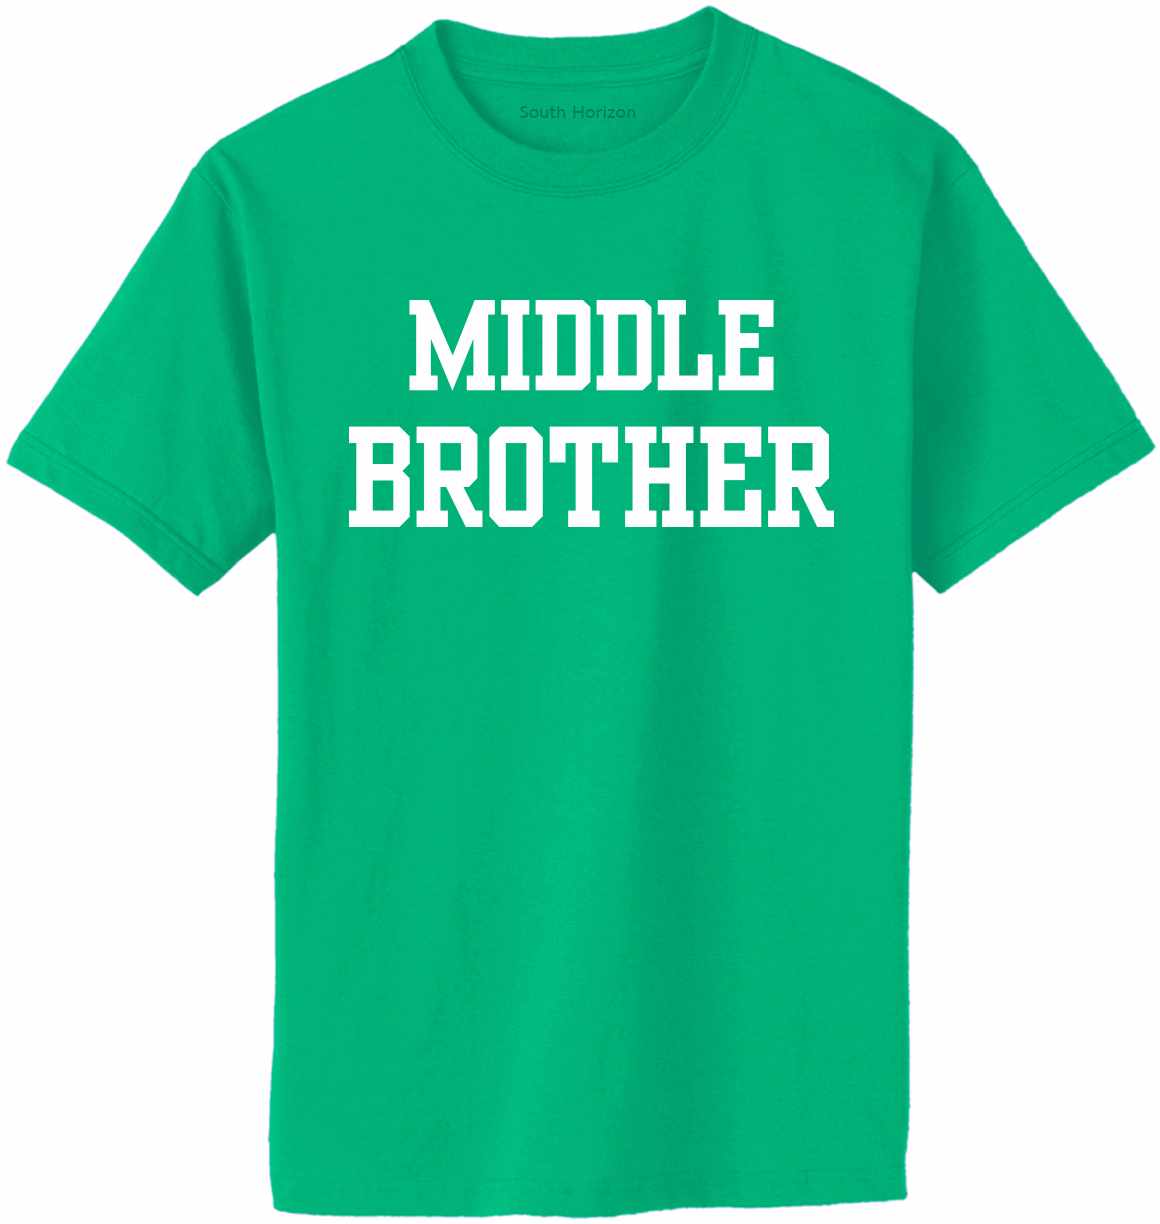 MIDDLE BROTHER Adult T-Shirt